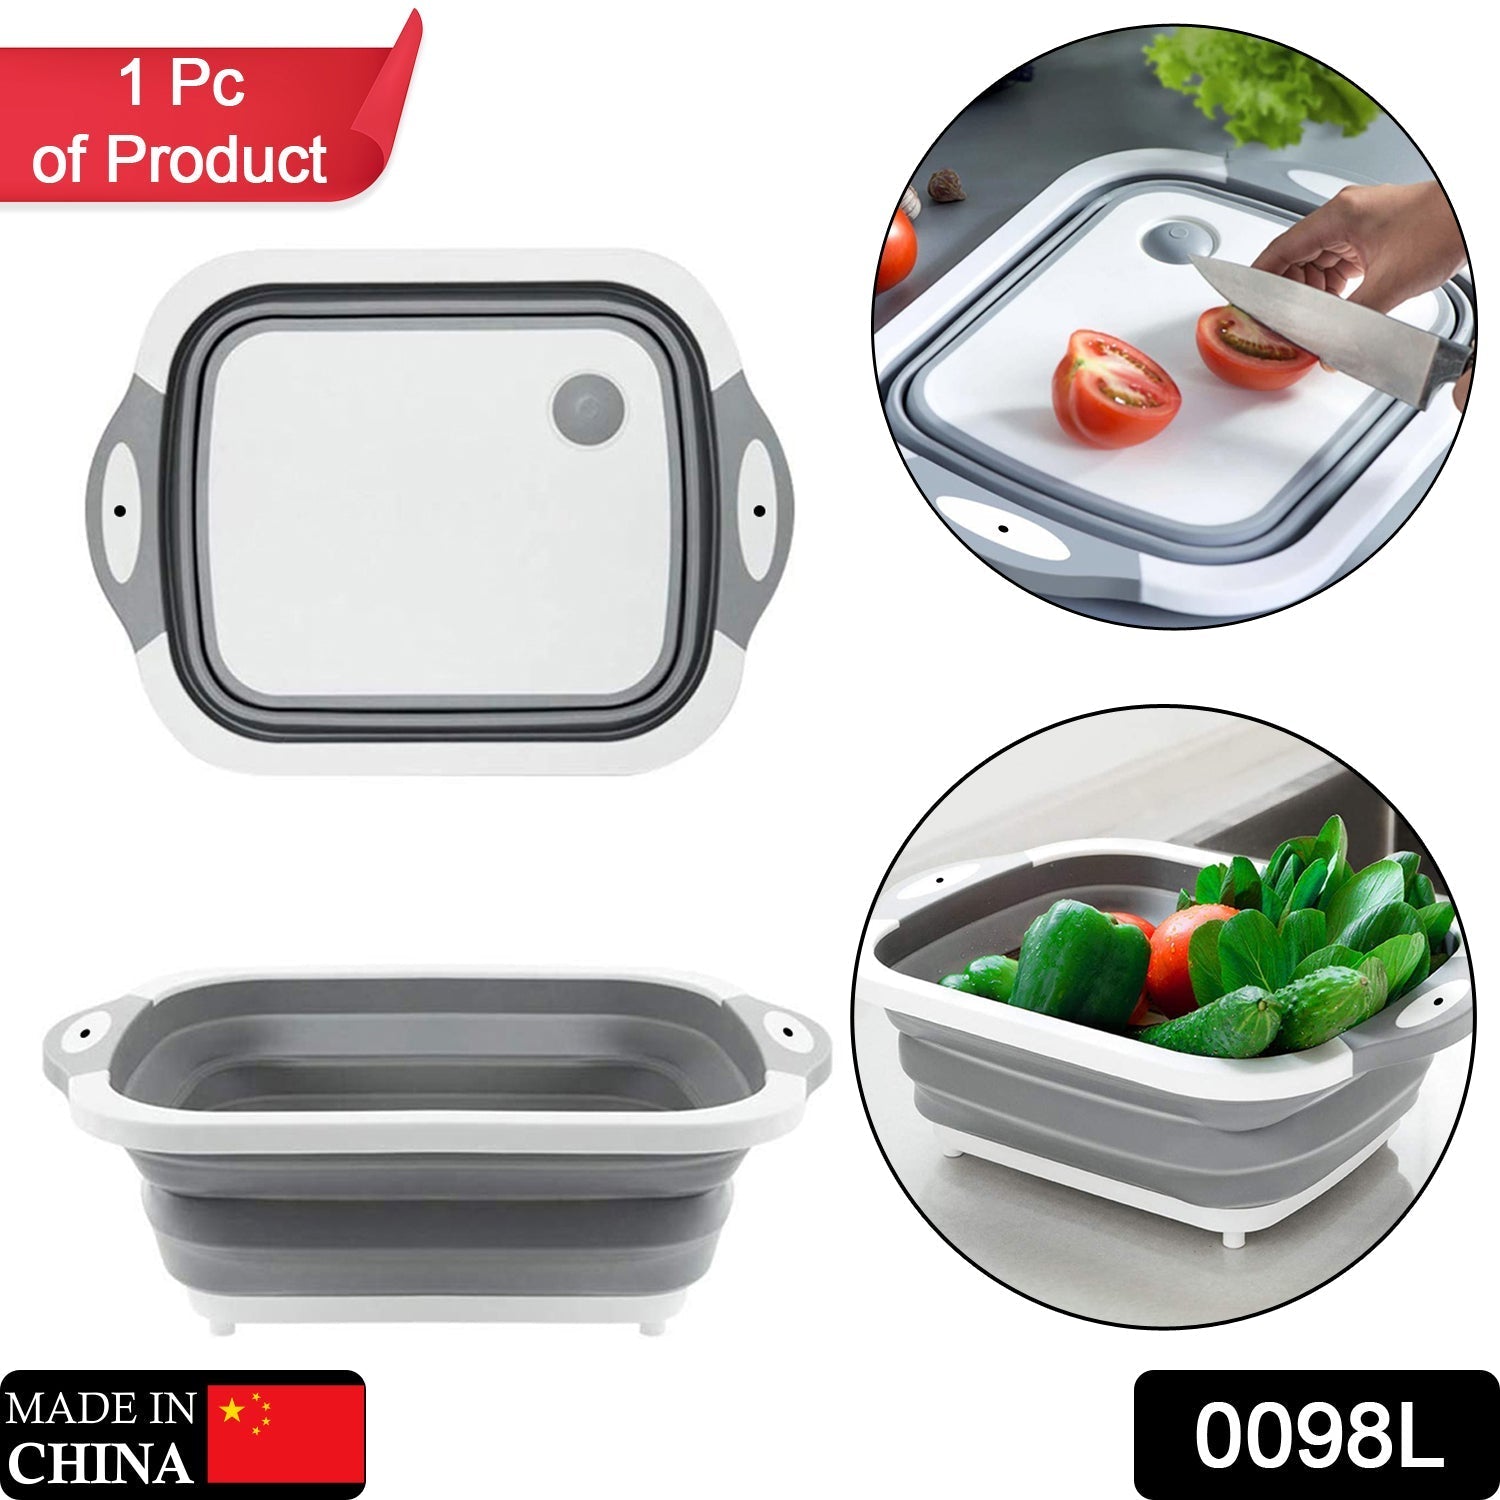 0098L COLLAPSIBLE CUTTING BOARD WITH DISH TUB BASKET For Kitchen Use ( 1 Pcs ) DeoDap